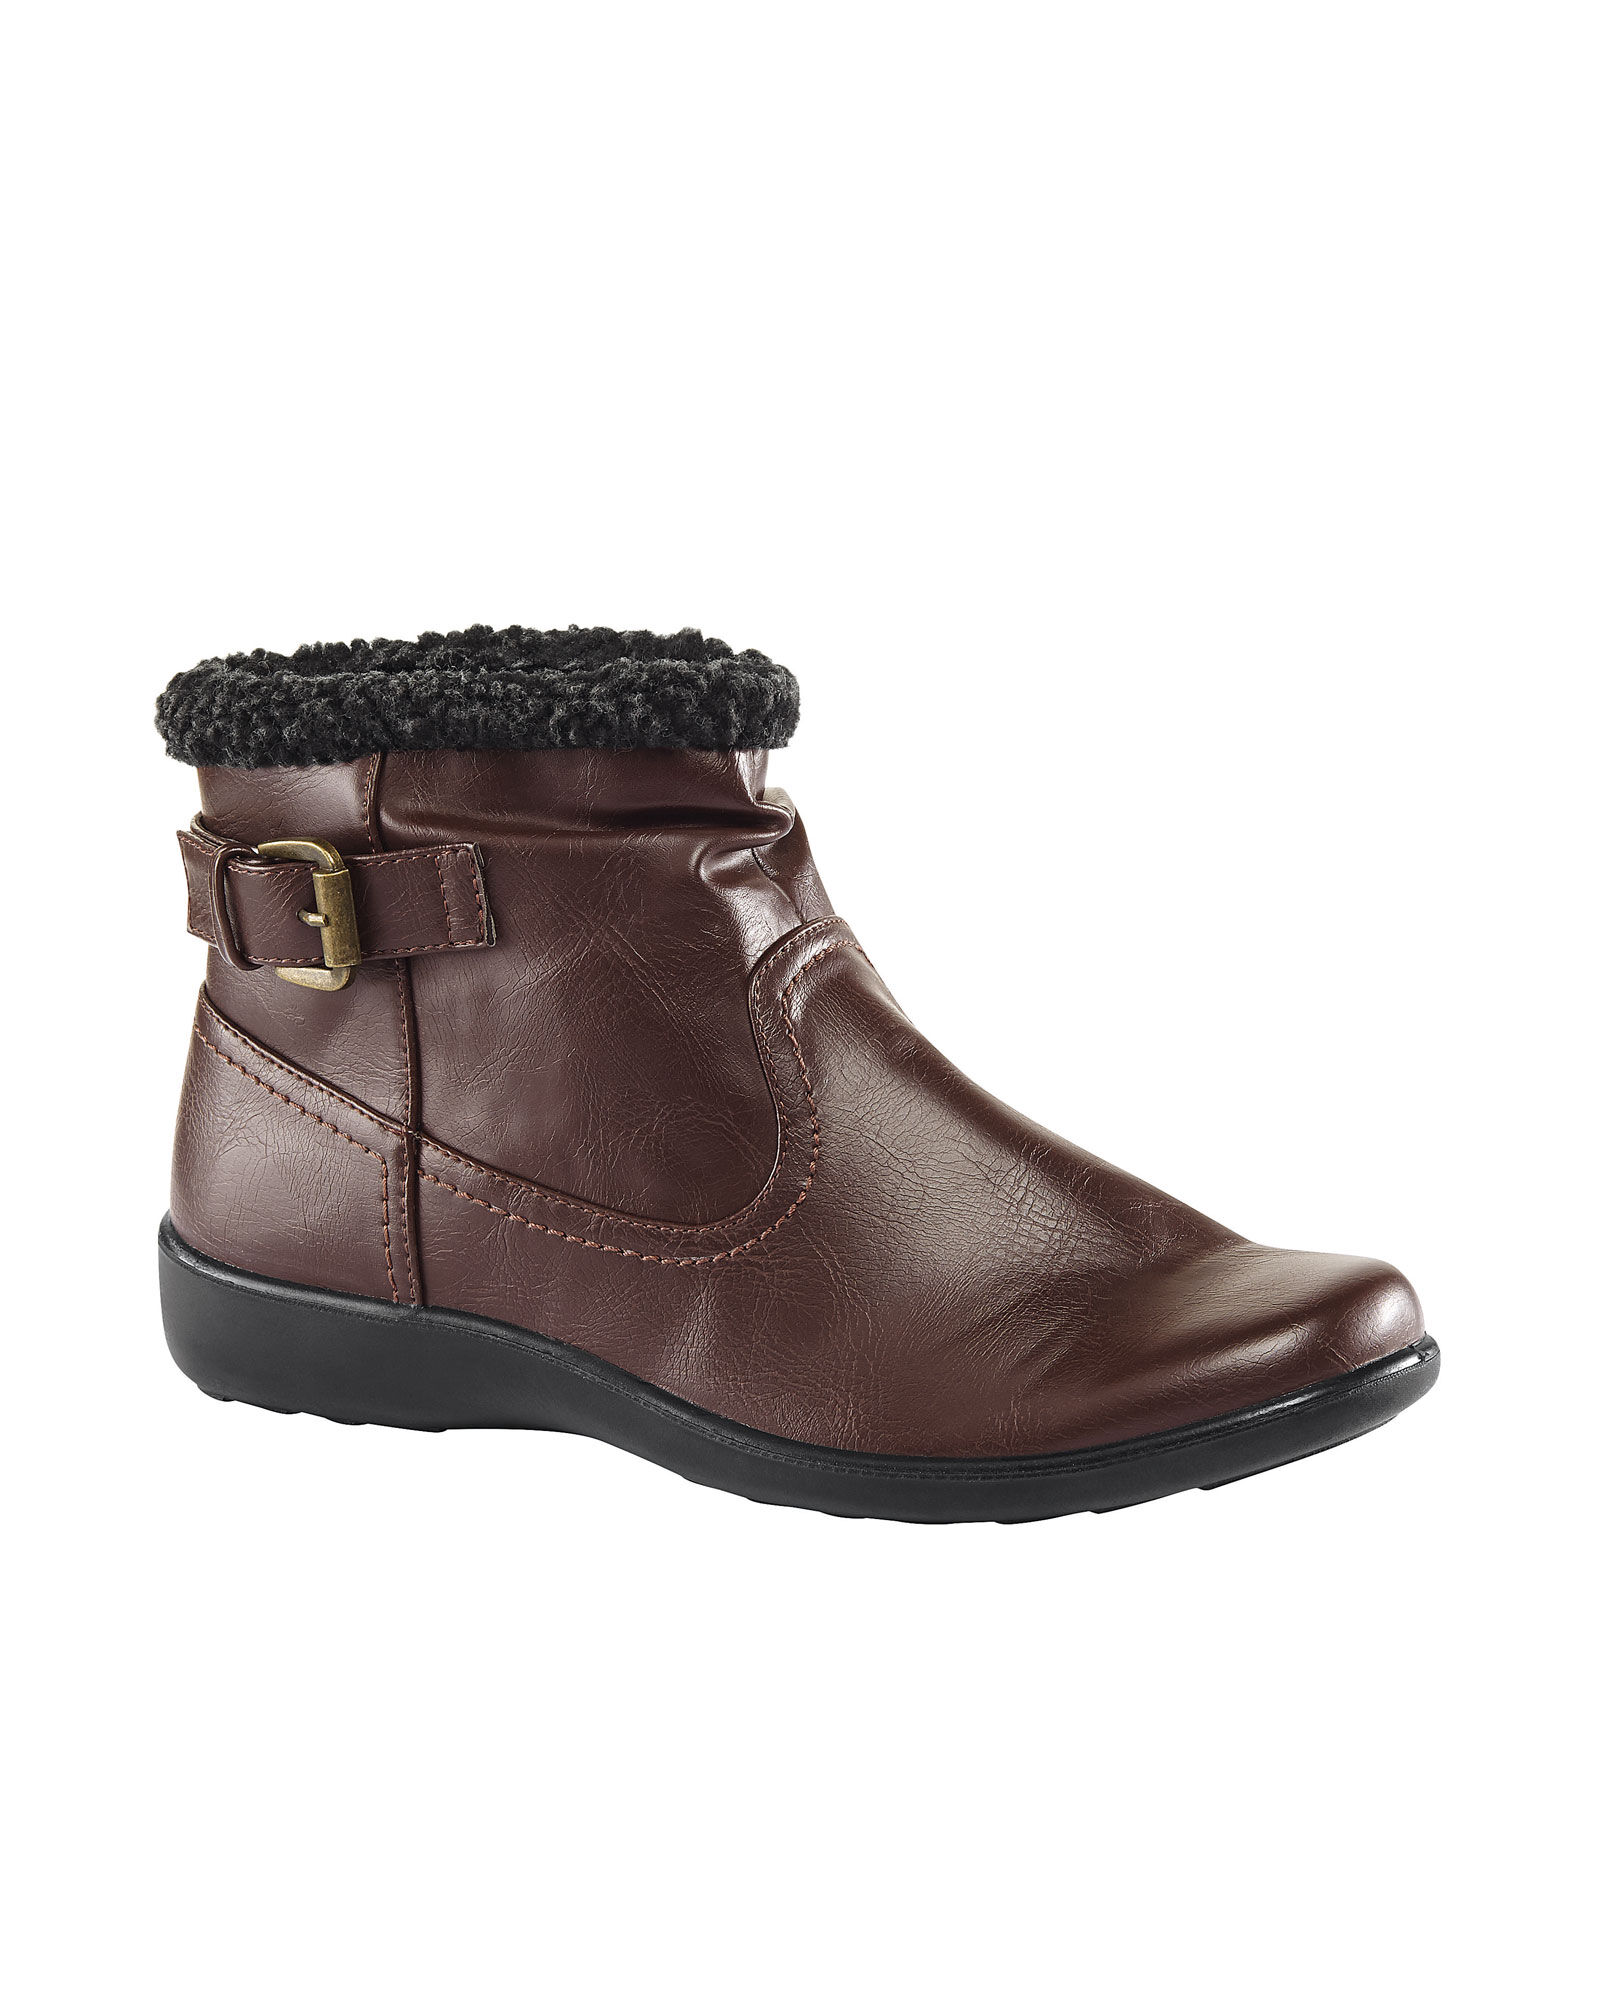 cotton traders womens boots